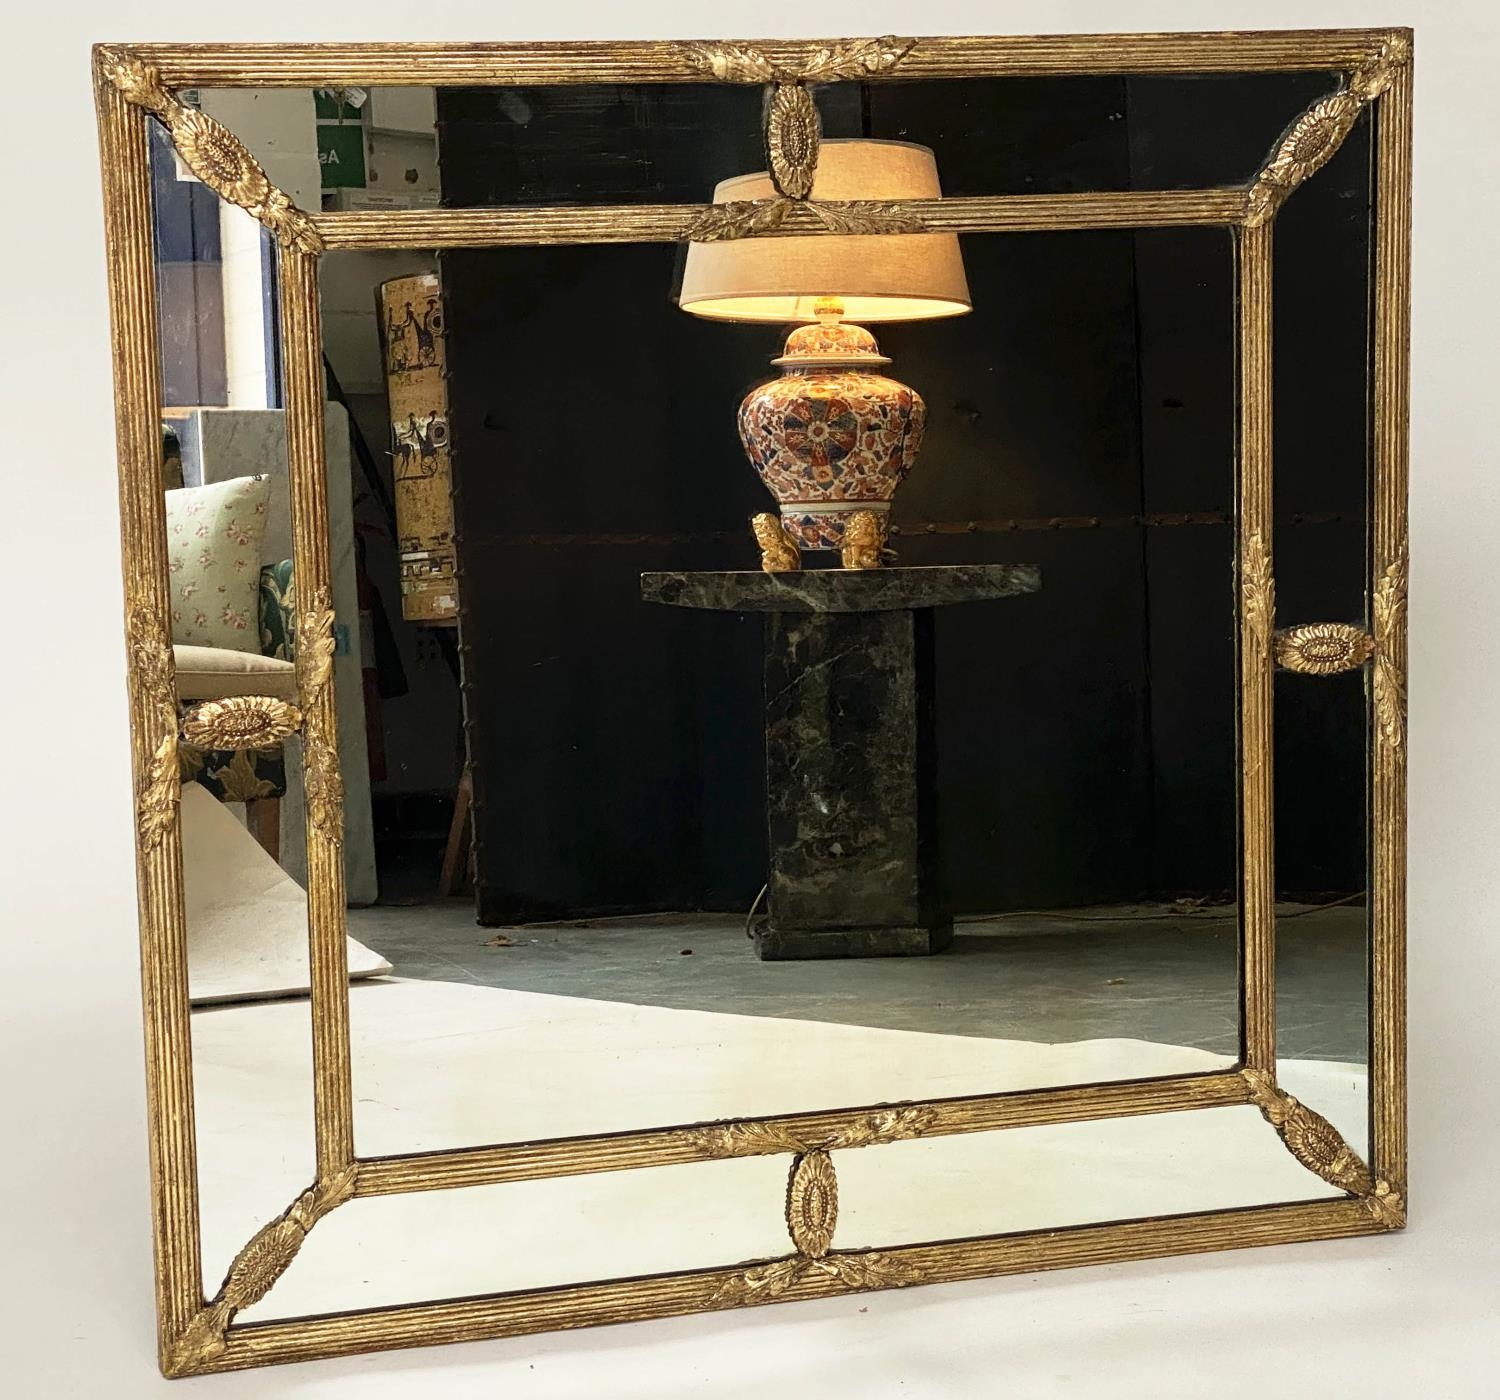 WALL MIRROR, early 20th century Regency style giltwood and gesso rectangular with reeded frame and